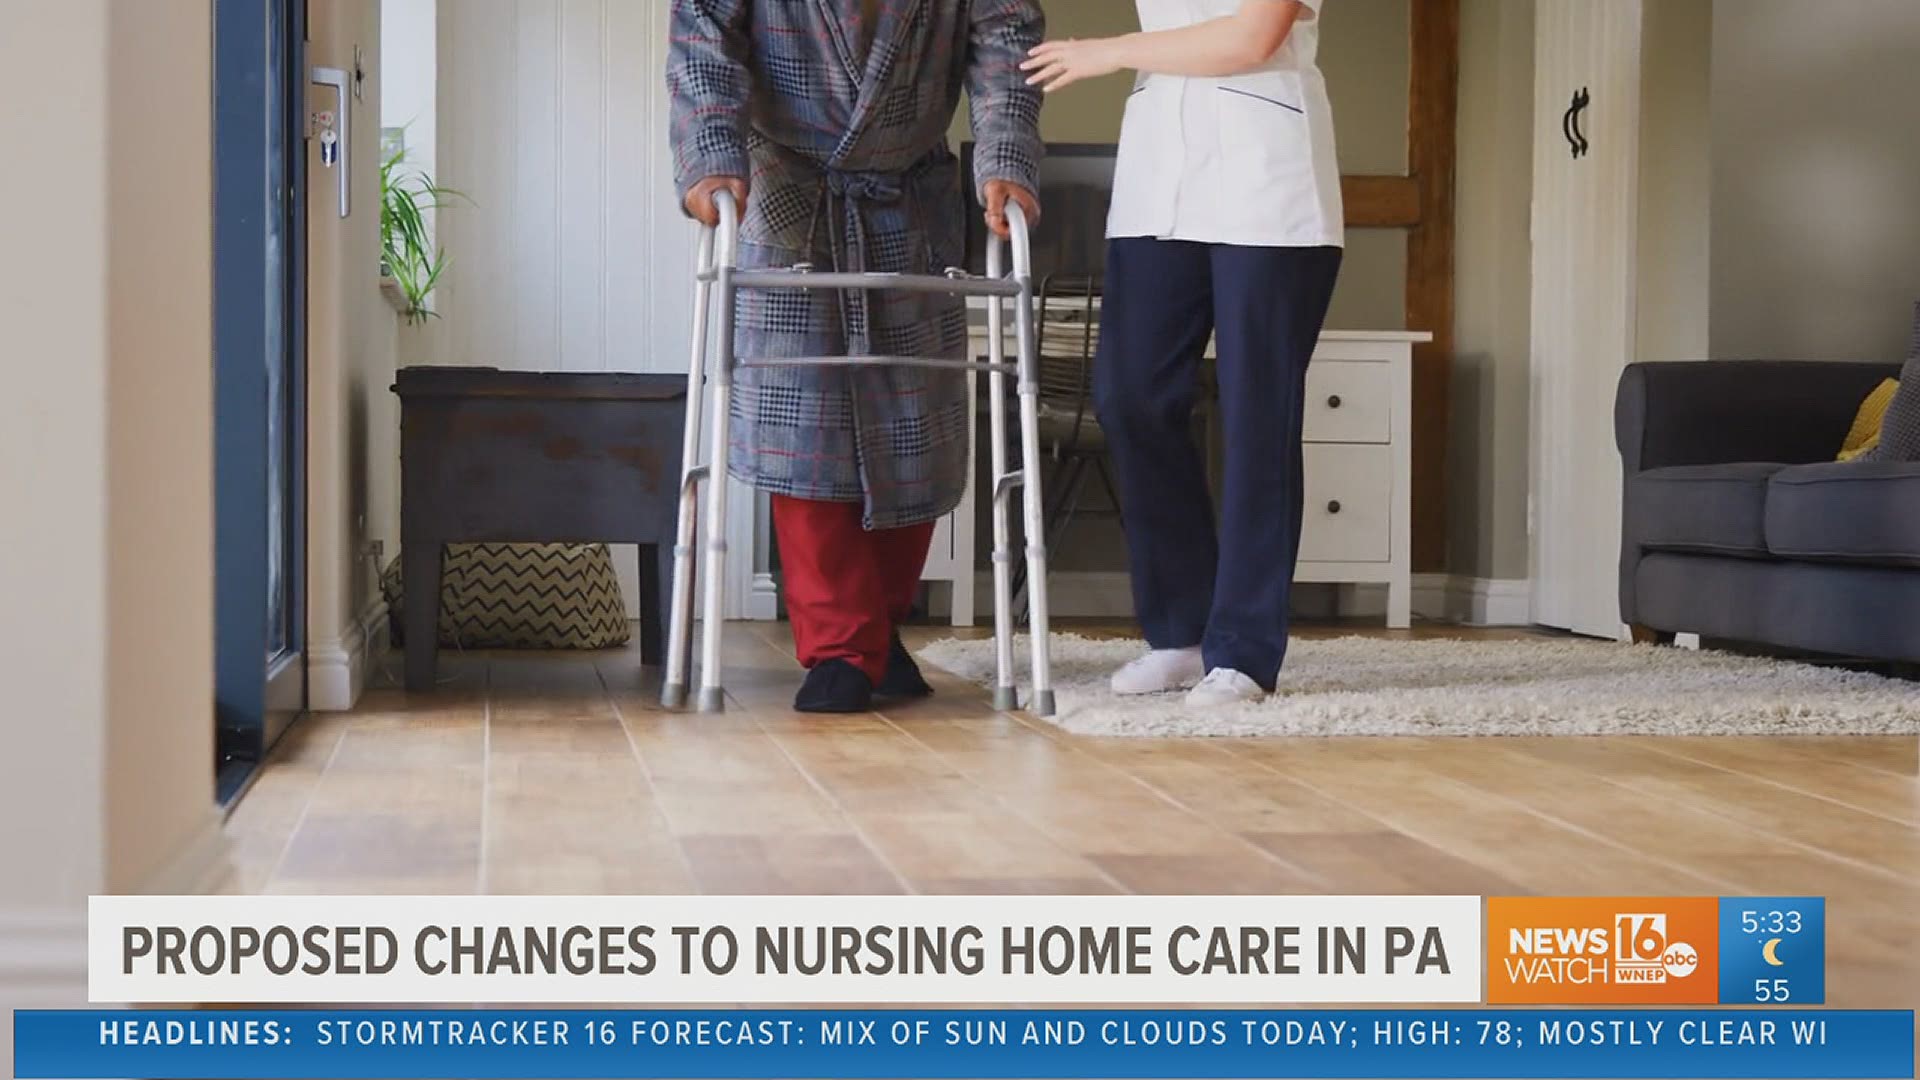 The governor wants to make major changes to help the thousands who get nursing home care in Pennsylvania.